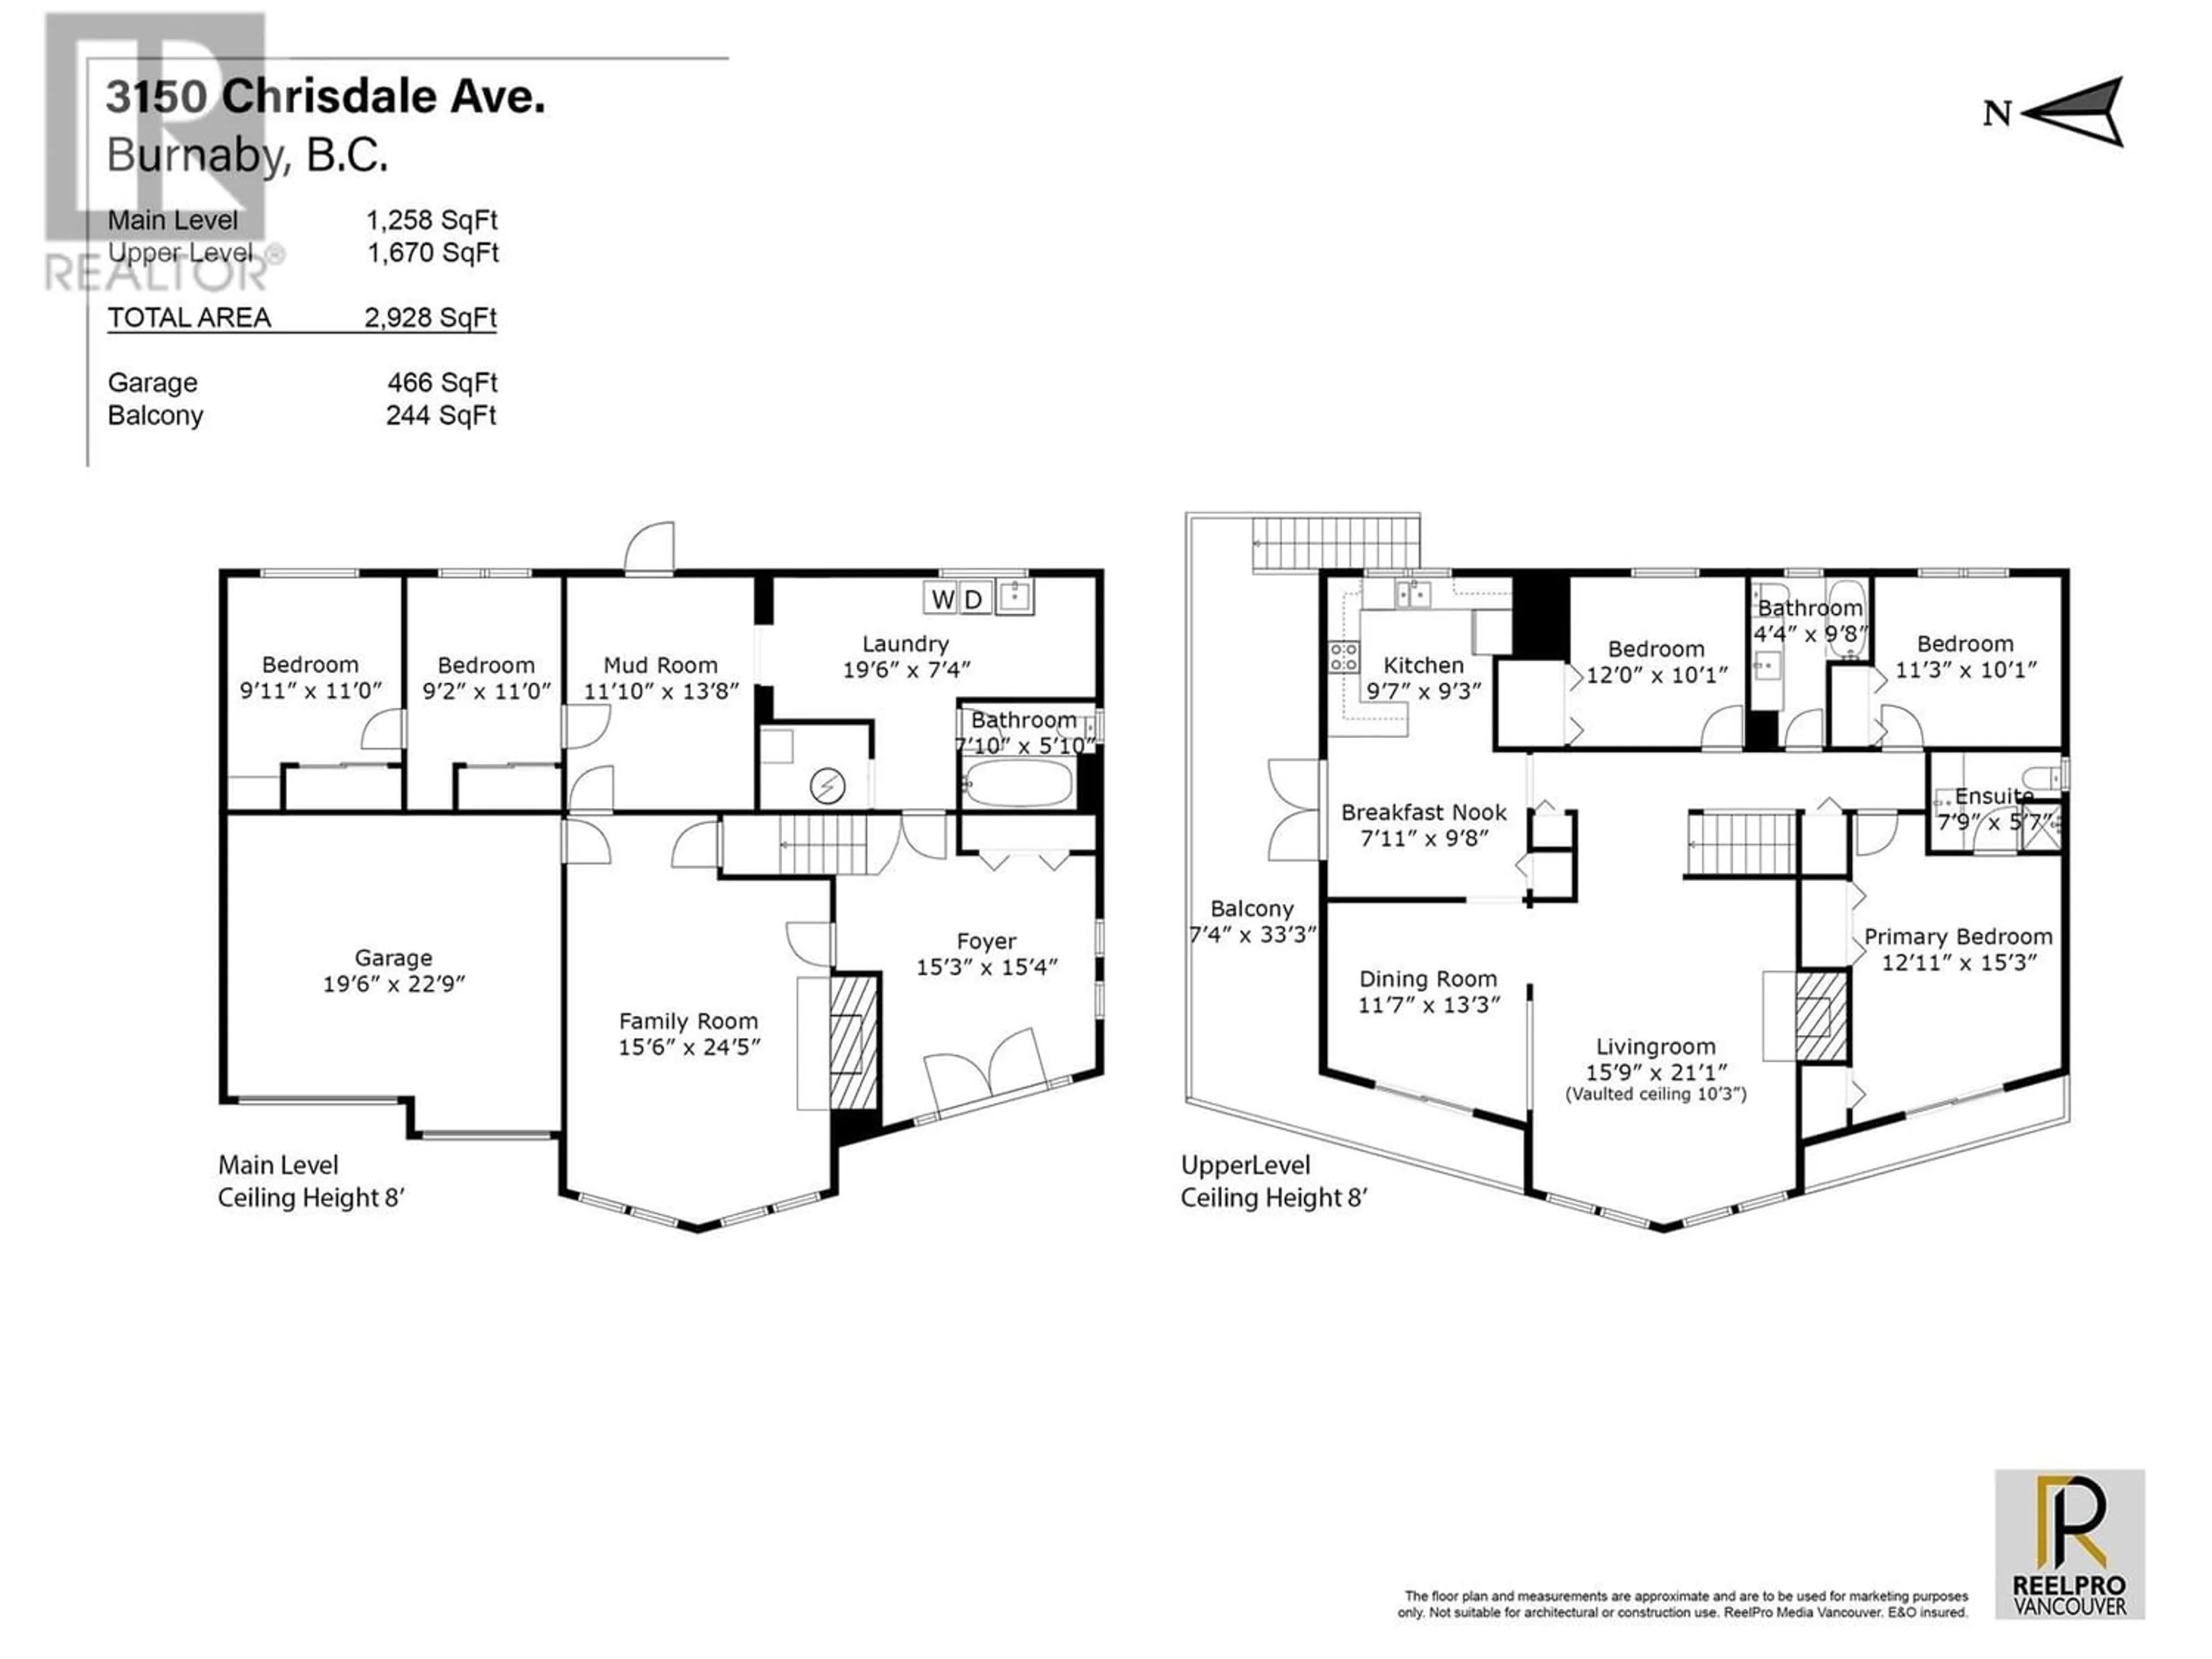 Floor plan for 3150 CHRISDALE AVENUE, Burnaby British Columbia V5A3T3